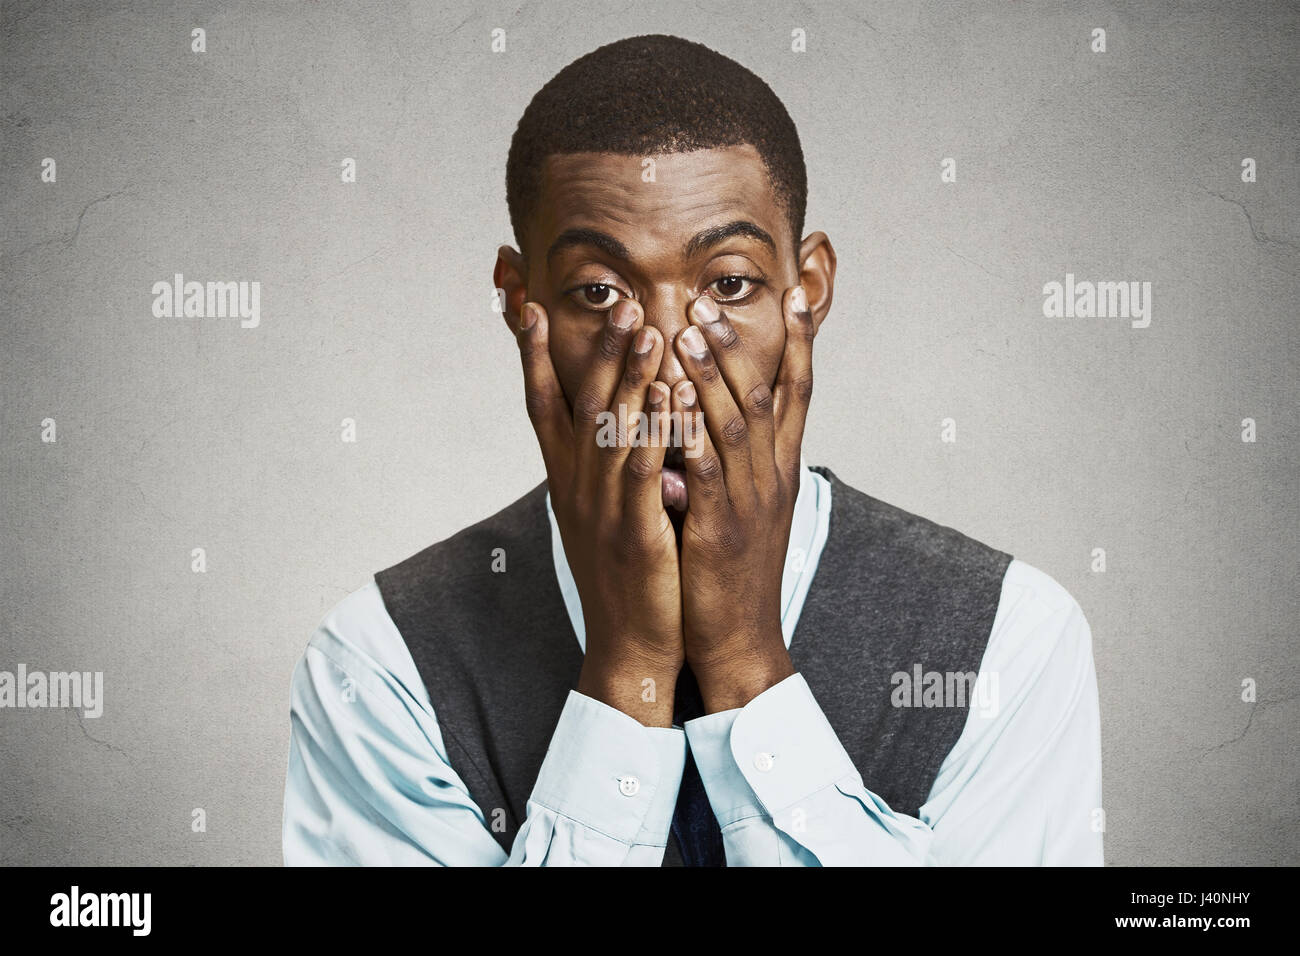 Closeup portrait, headshot young tired, fatigued business man worried, stressed, dragging face down with hands, isolated black, grey background. Negat Stock Photo